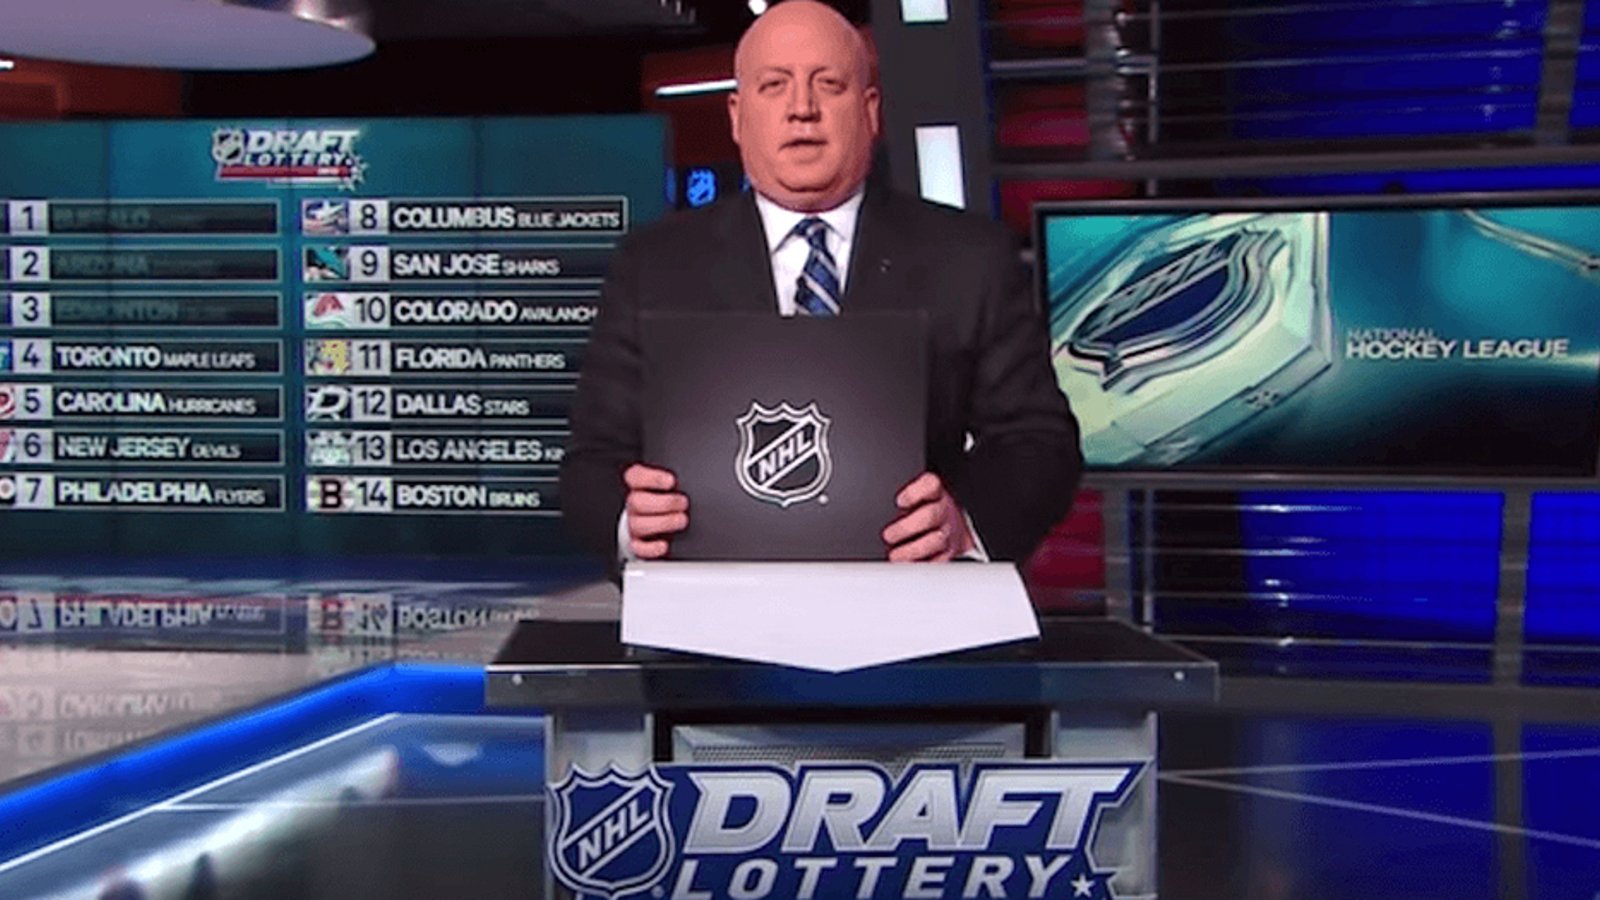 NHL insider Bob McKenzie provides an update on the Draft Lottery